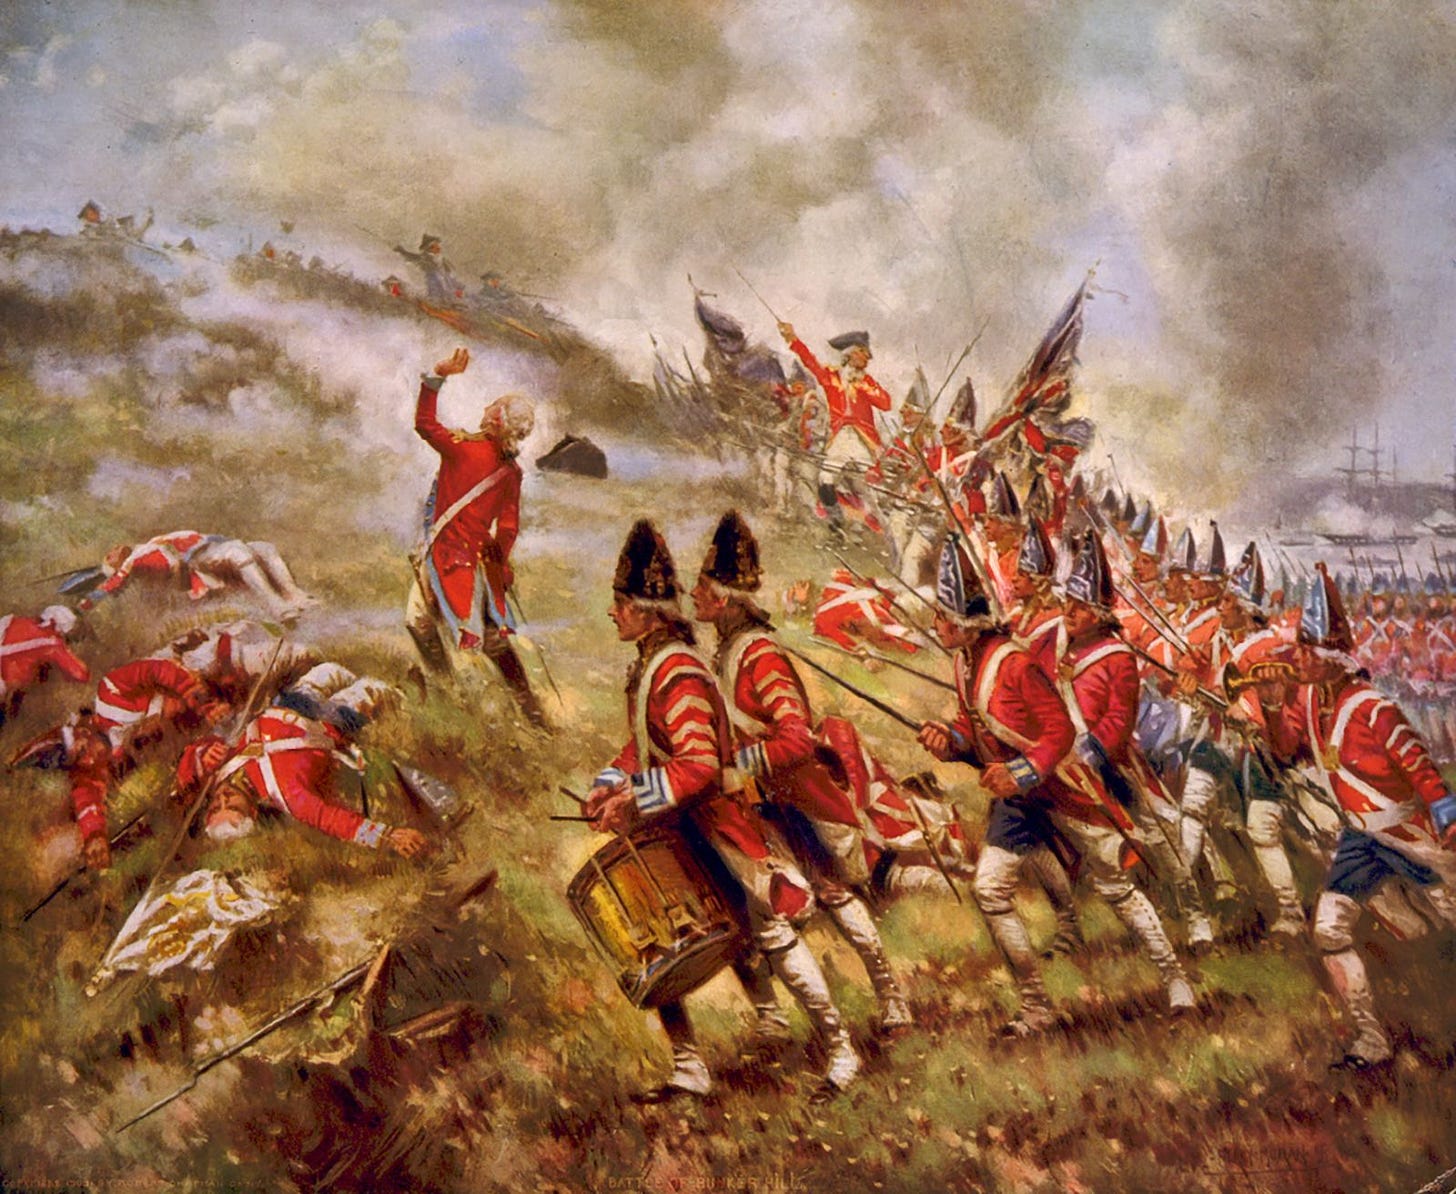 Battle of Bunker Hill | Facts, Map, Summary, & Significance | Britannica